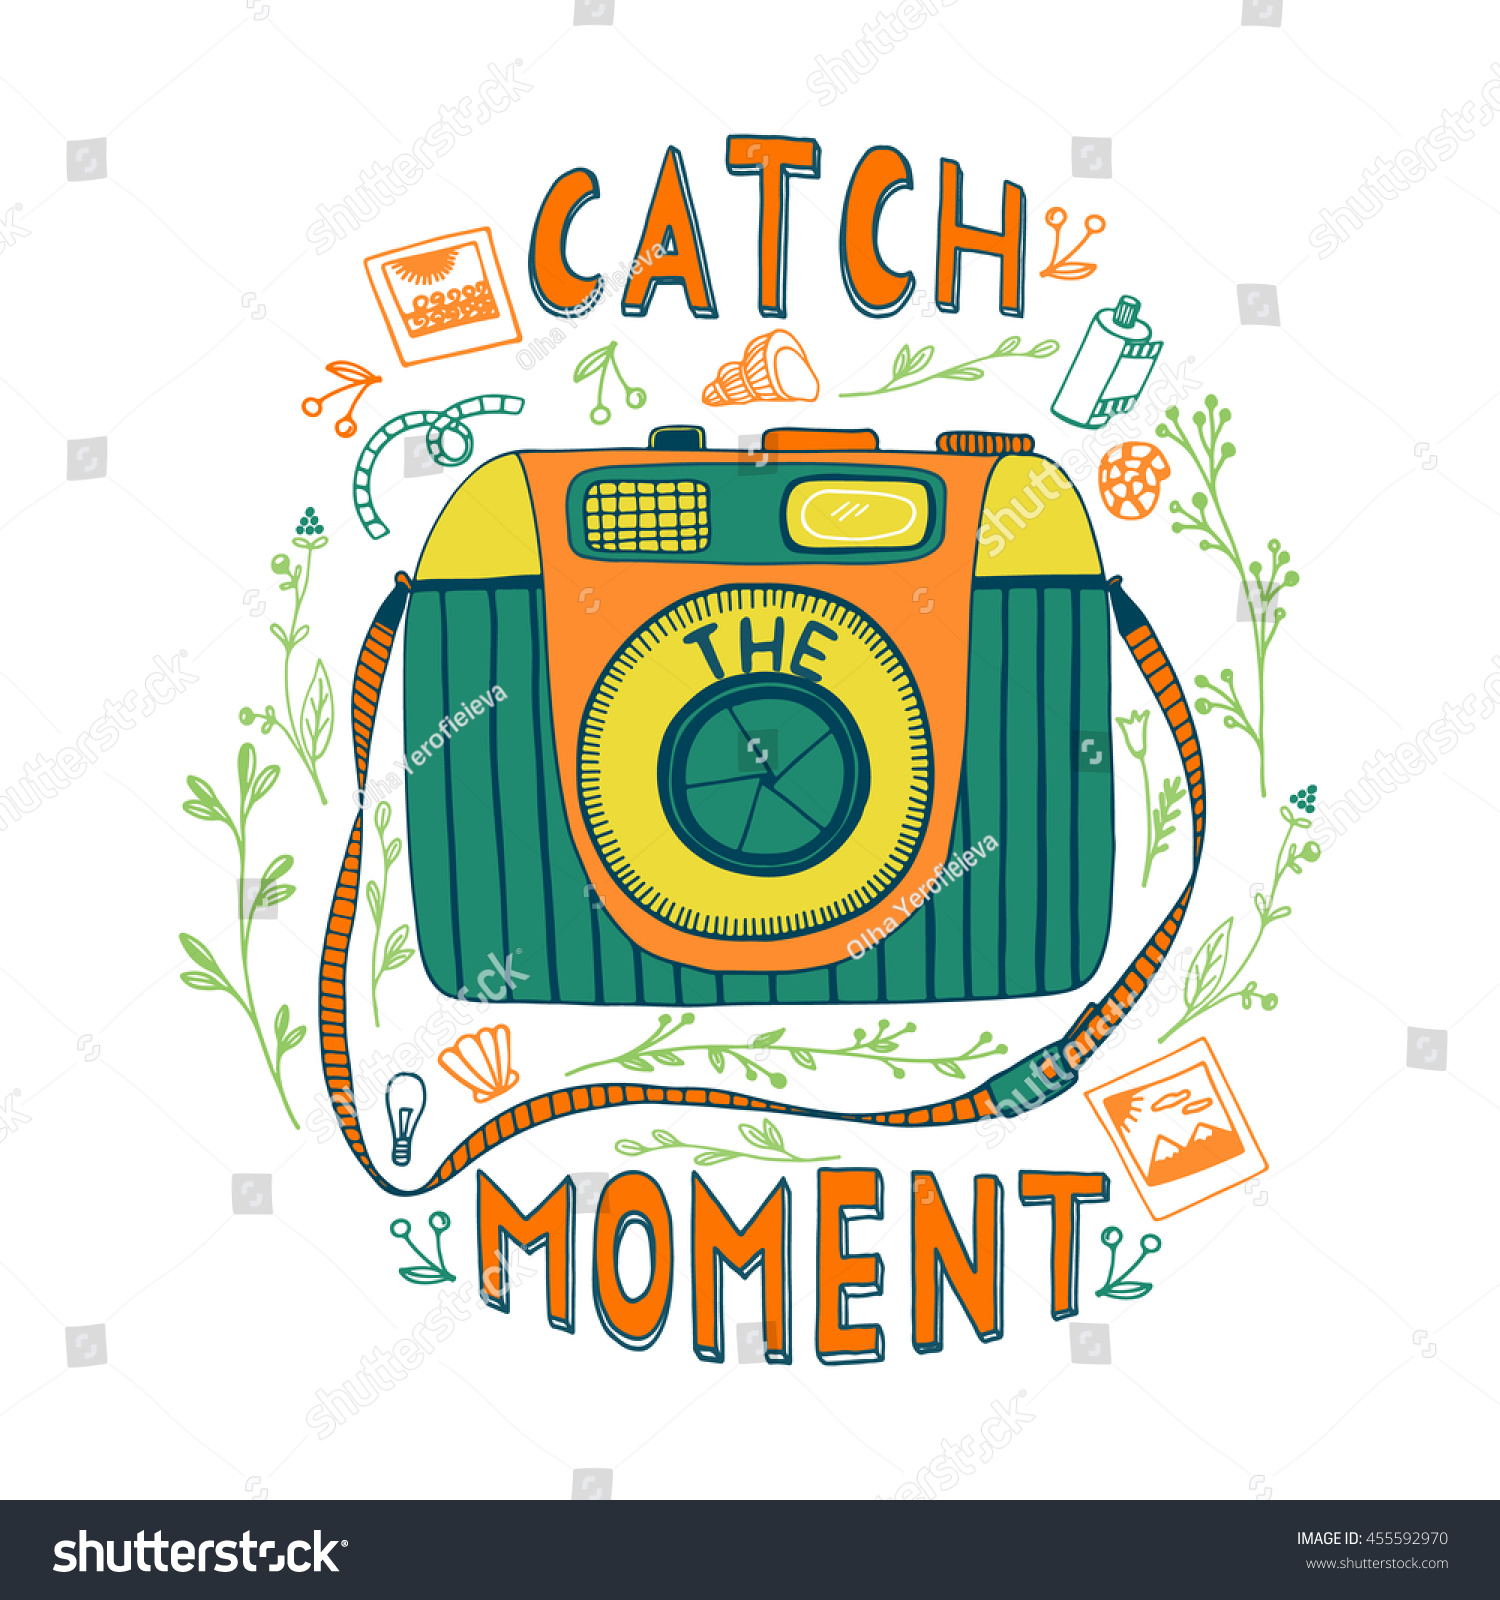 Catch Moment Motivational Quote Hand Drawn Stock Vector Royalty Free